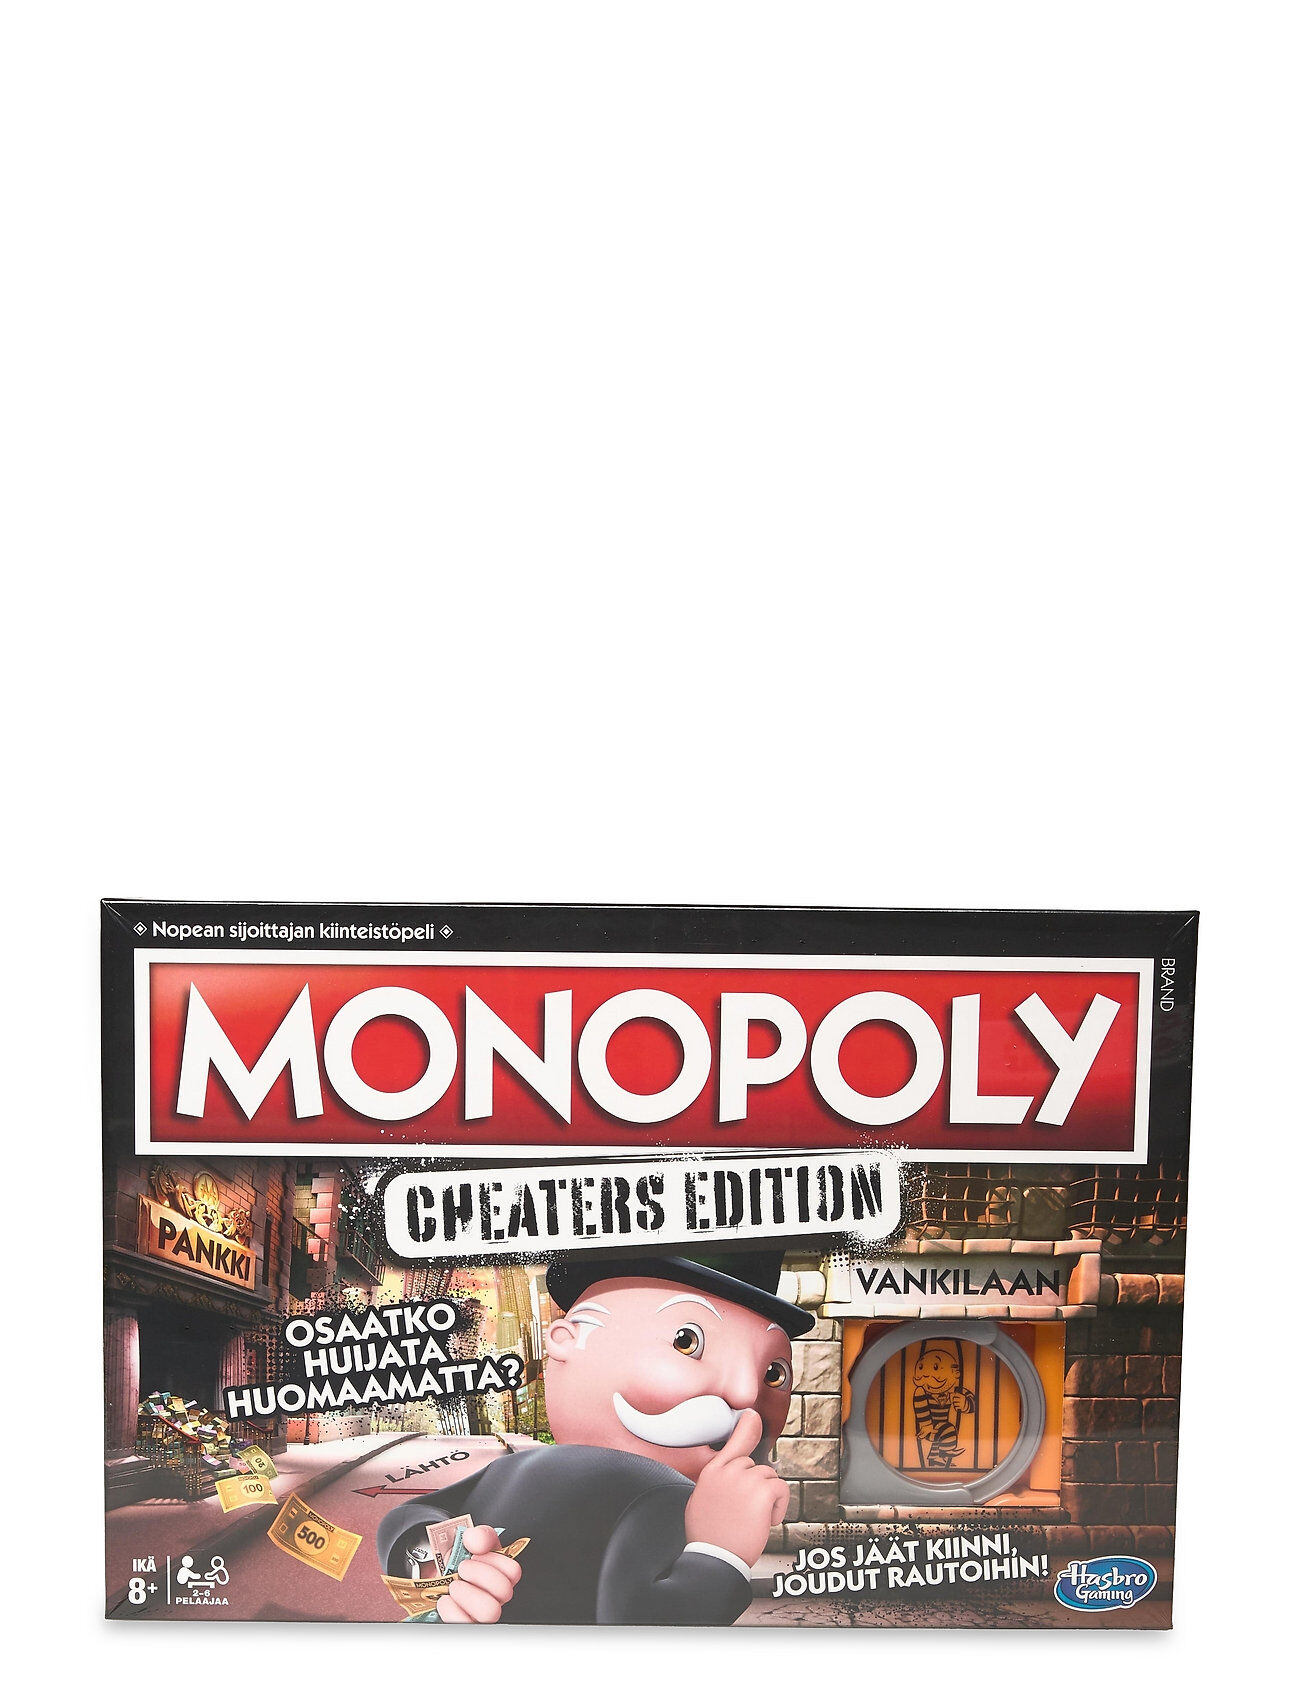 Monopoly Cheaters Edition Toys Puzzles And Games Games Multi/mønstret Monopoly